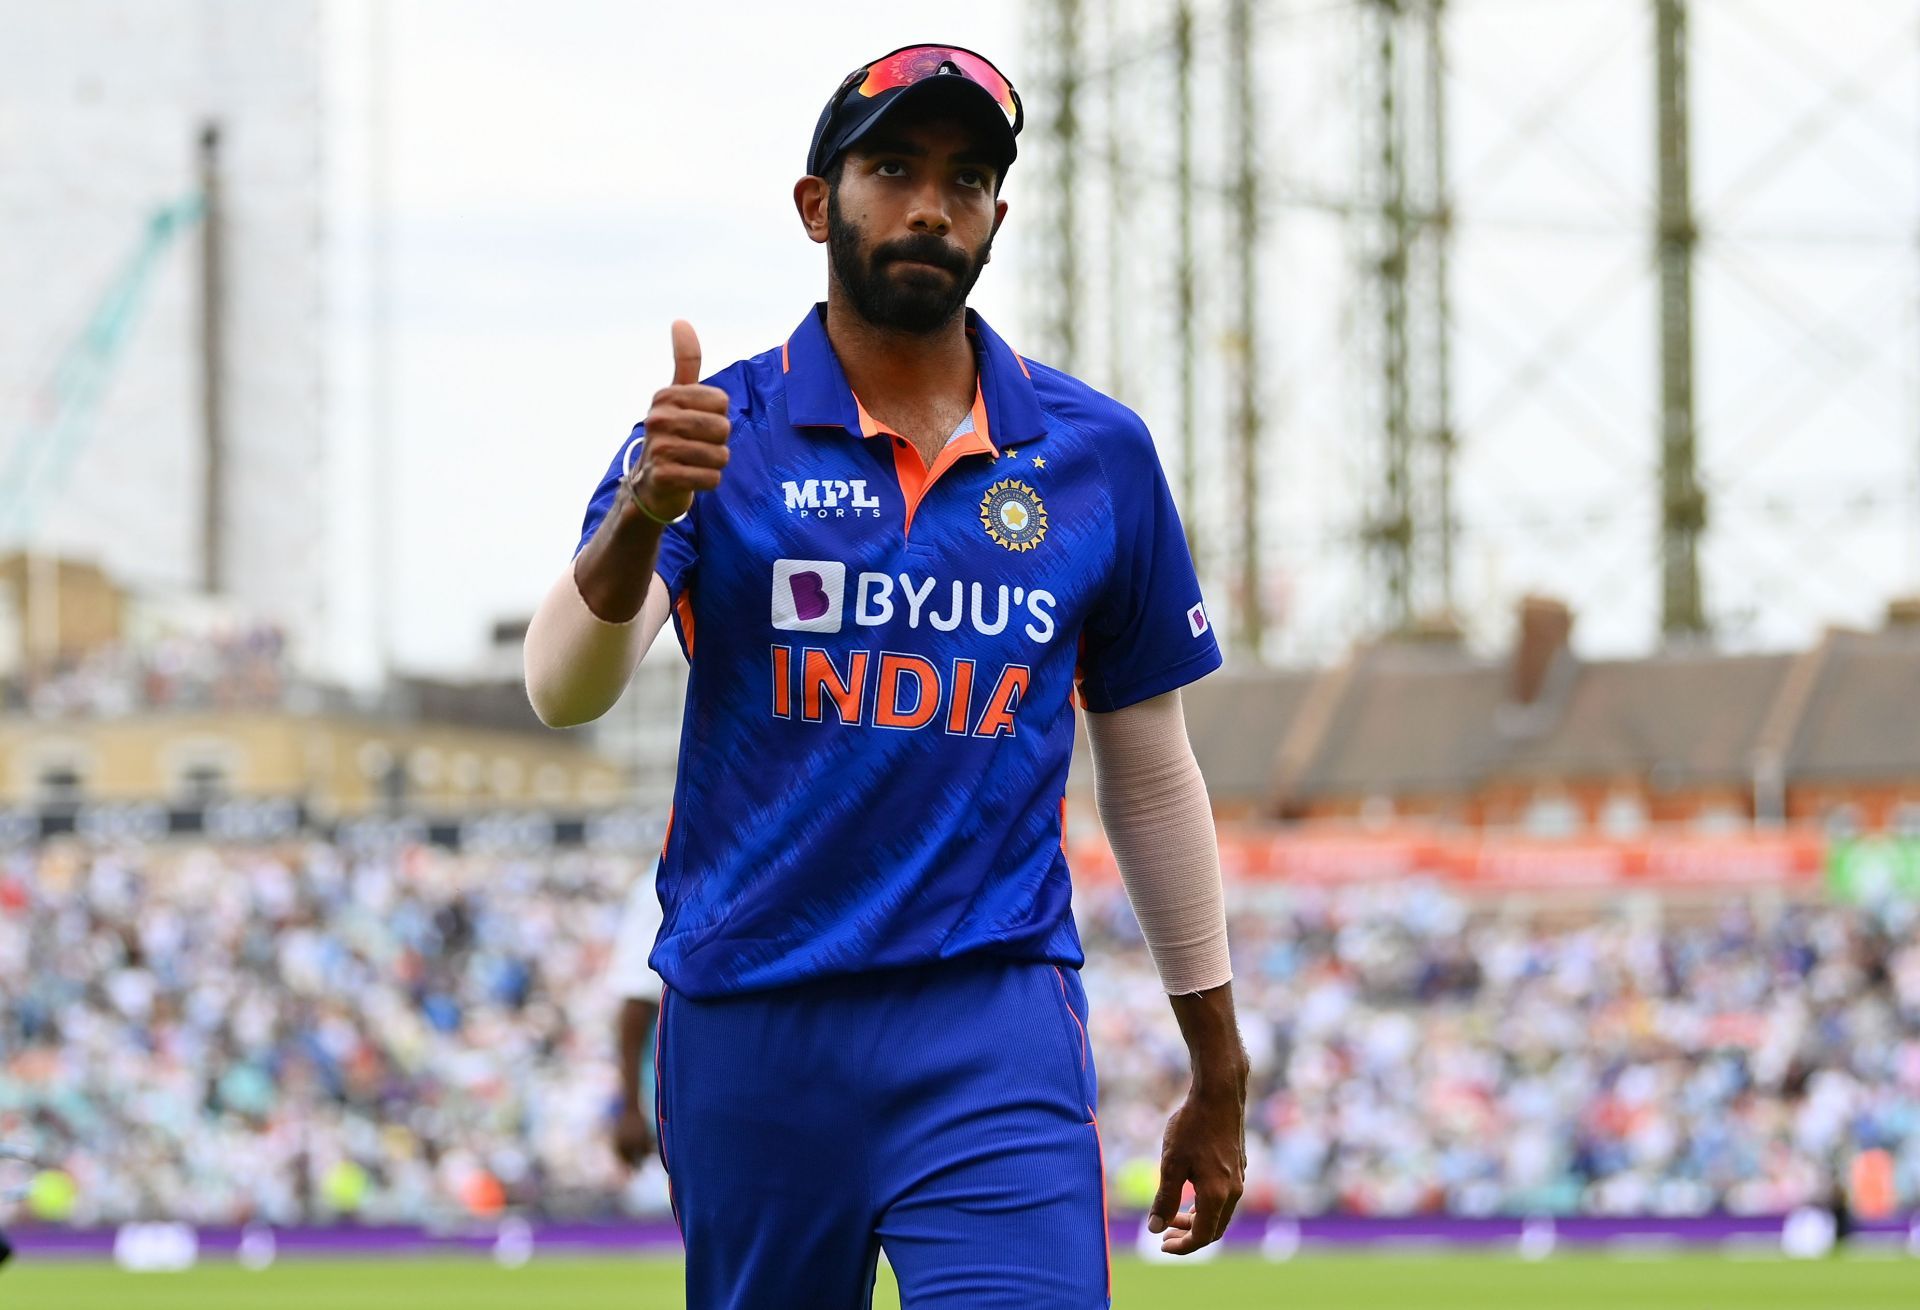 Jasprit Bumrah was duly chosen as the Player of the Match